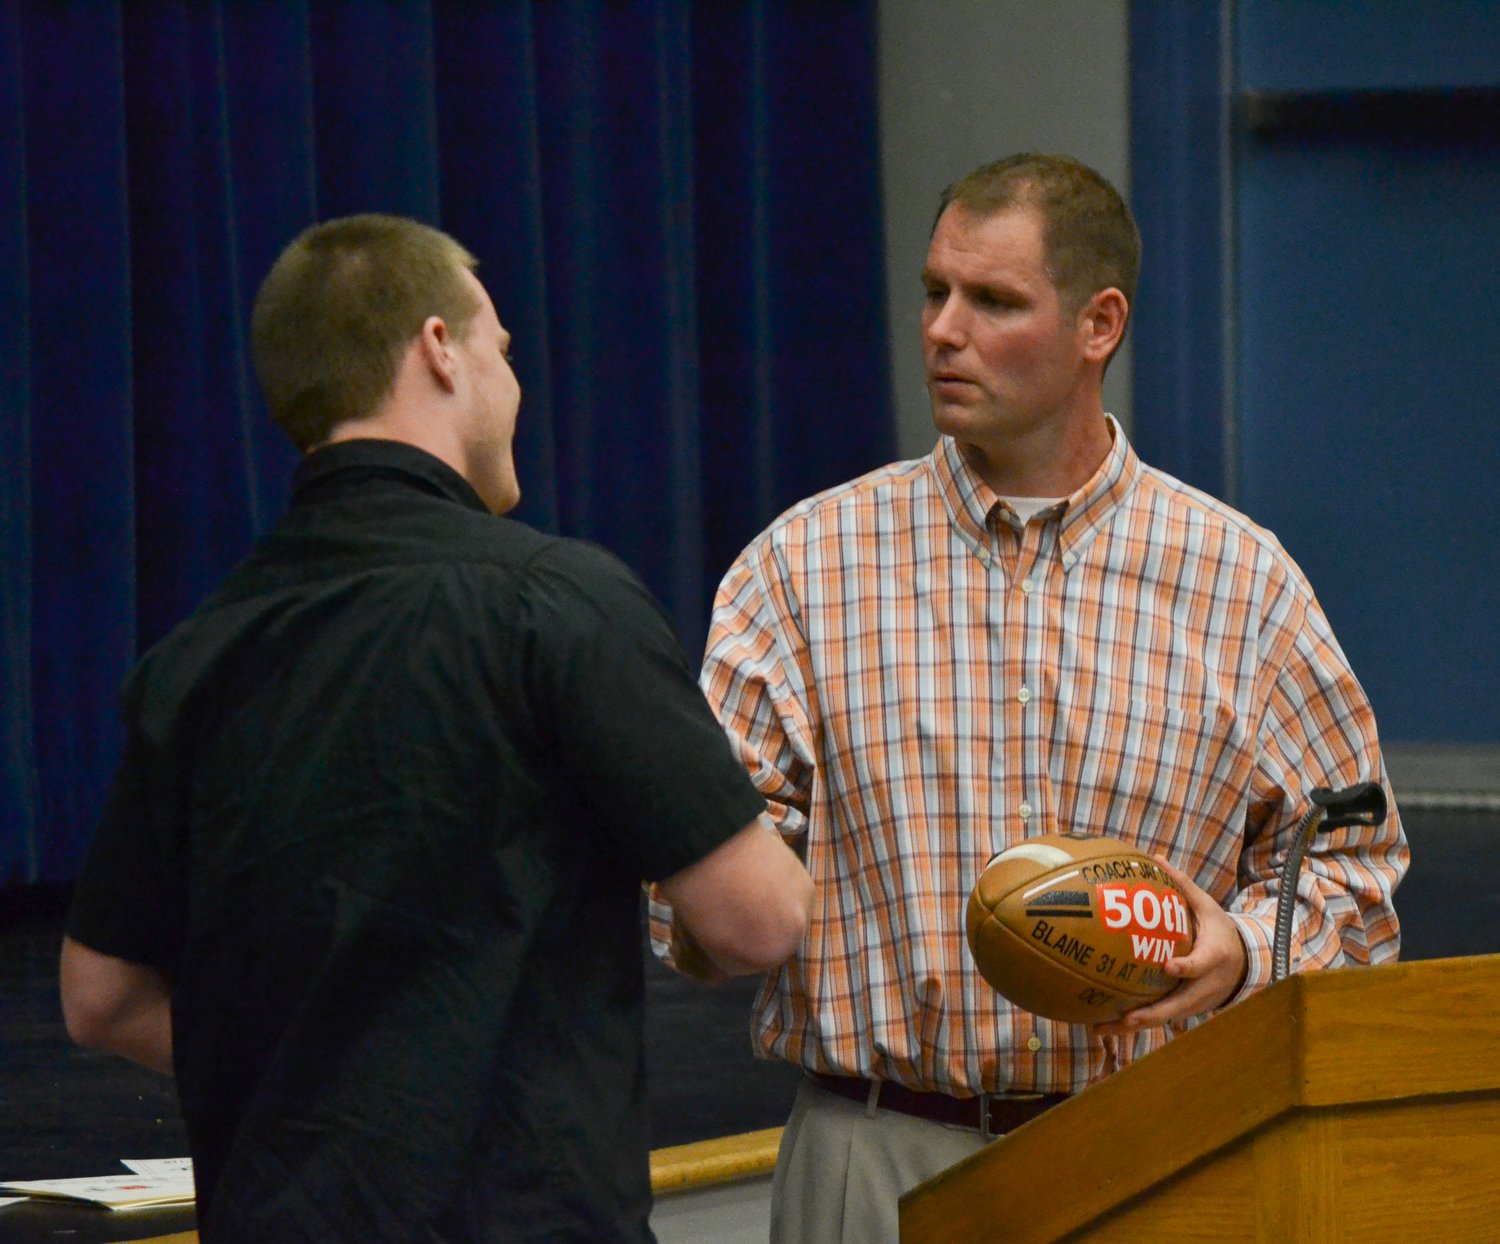 Jay Dodd is presented with the football from his 50th winning game as Blaine’s football coach in November 2014.